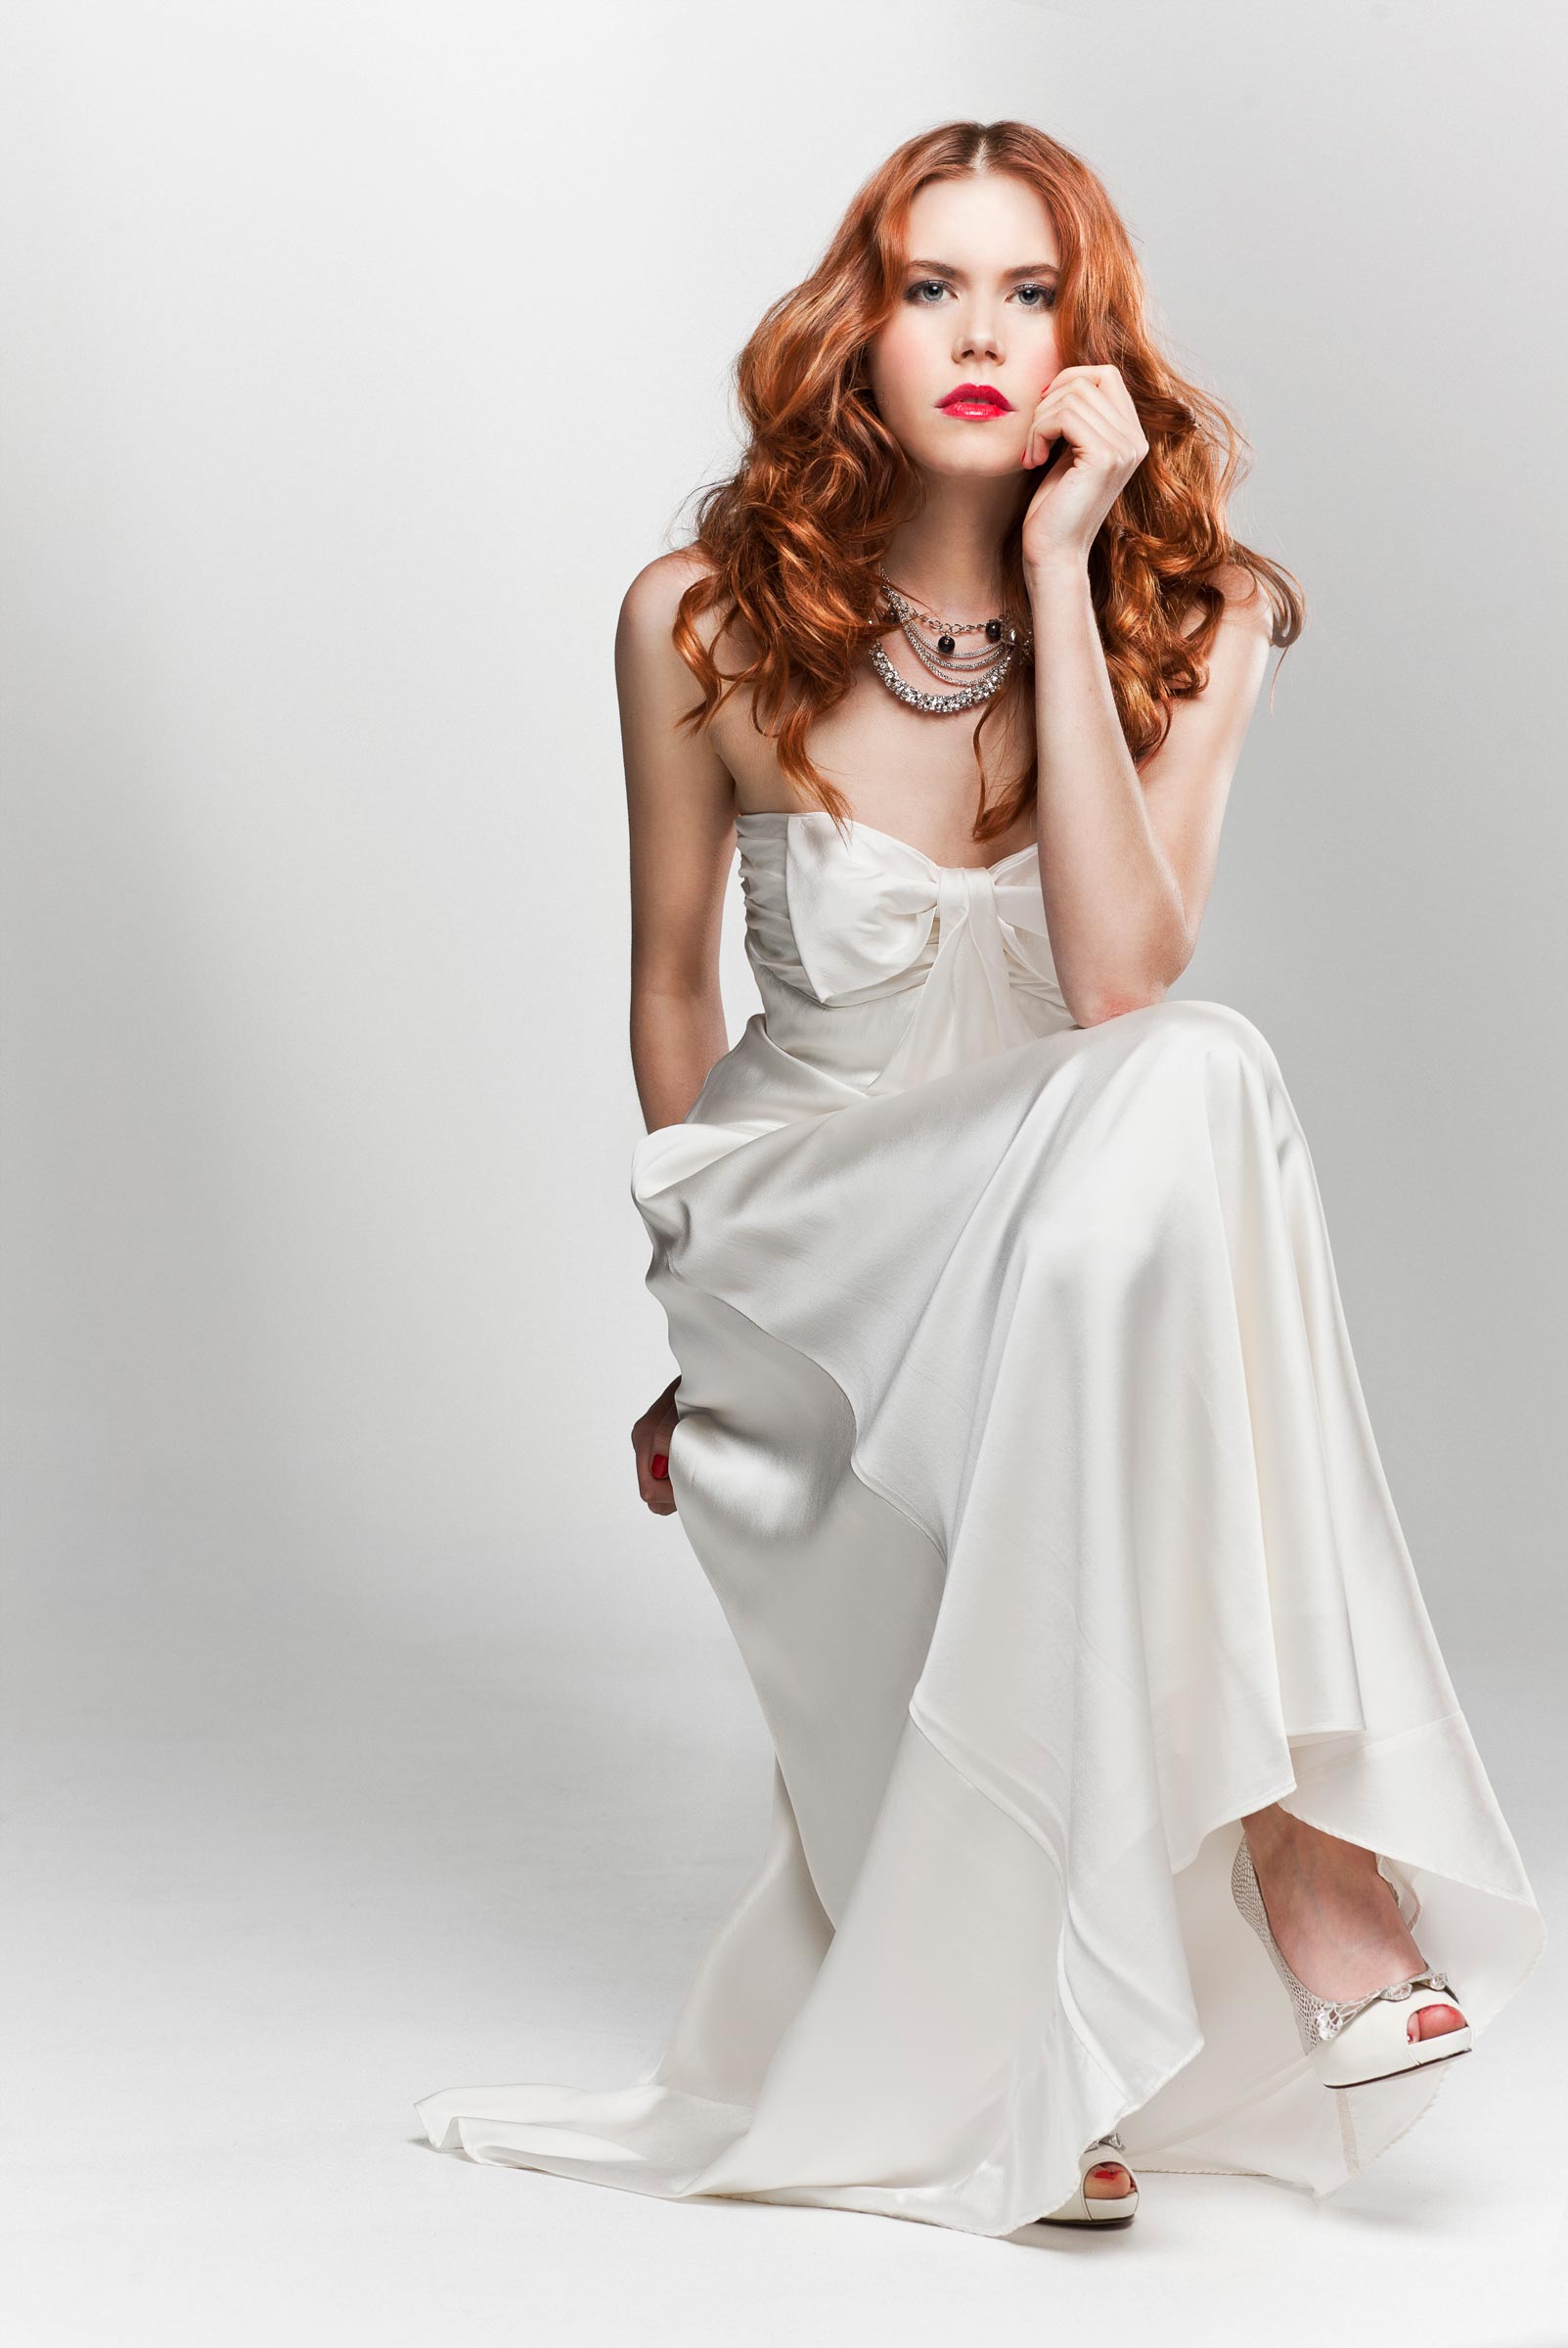 Studio fashion photography of seated woman with long red wavy hair wearing long white dress